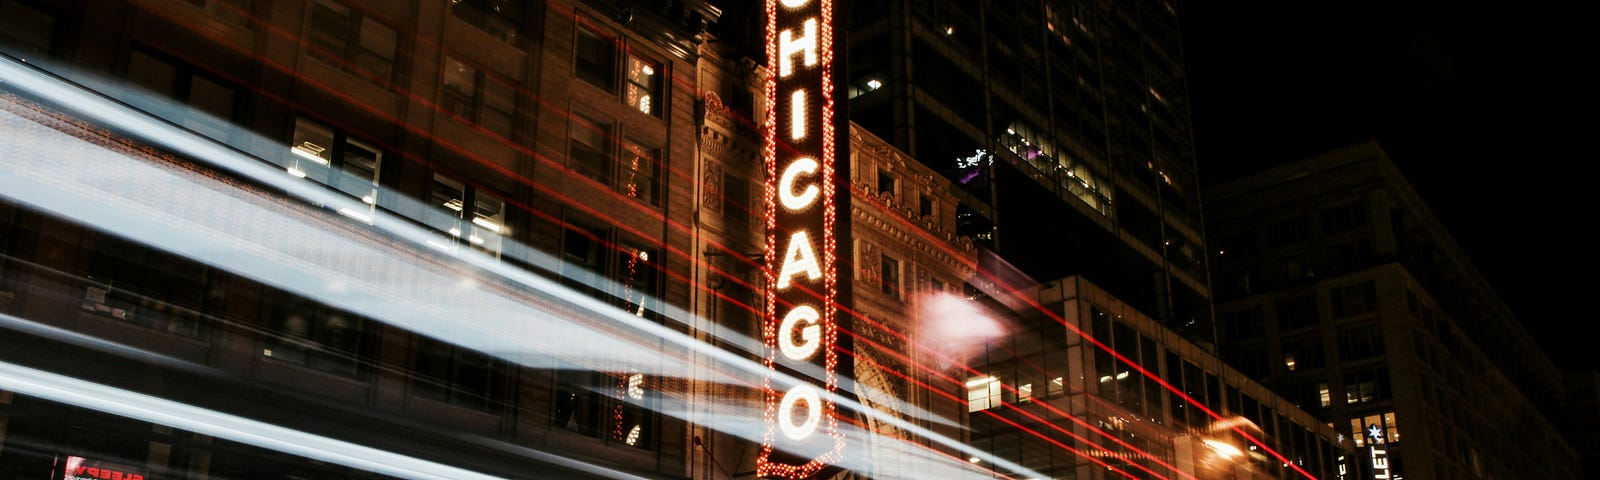 chicago marquis at night